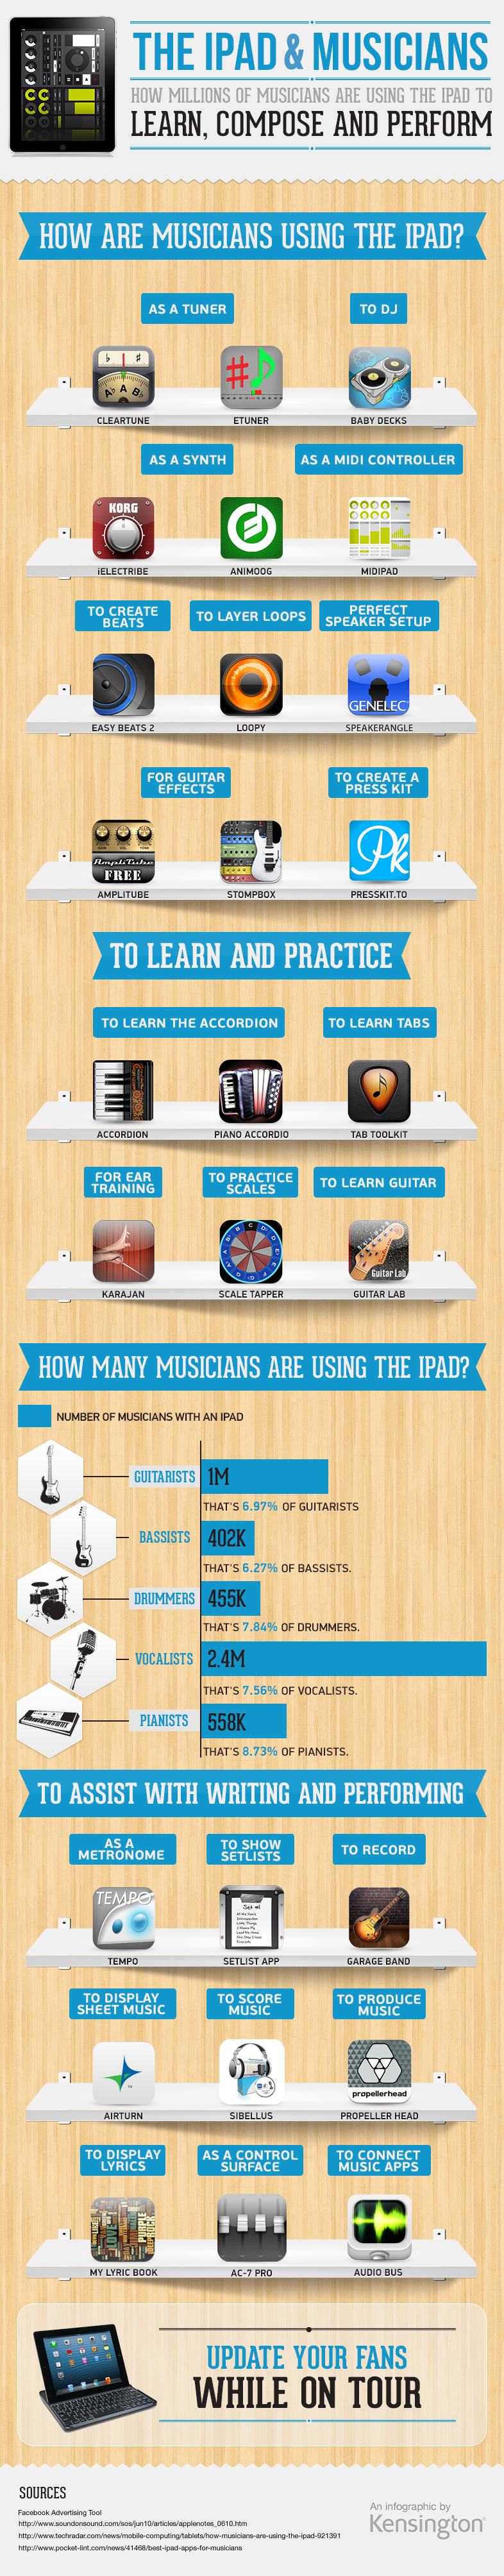 How are musicians using the iPad?